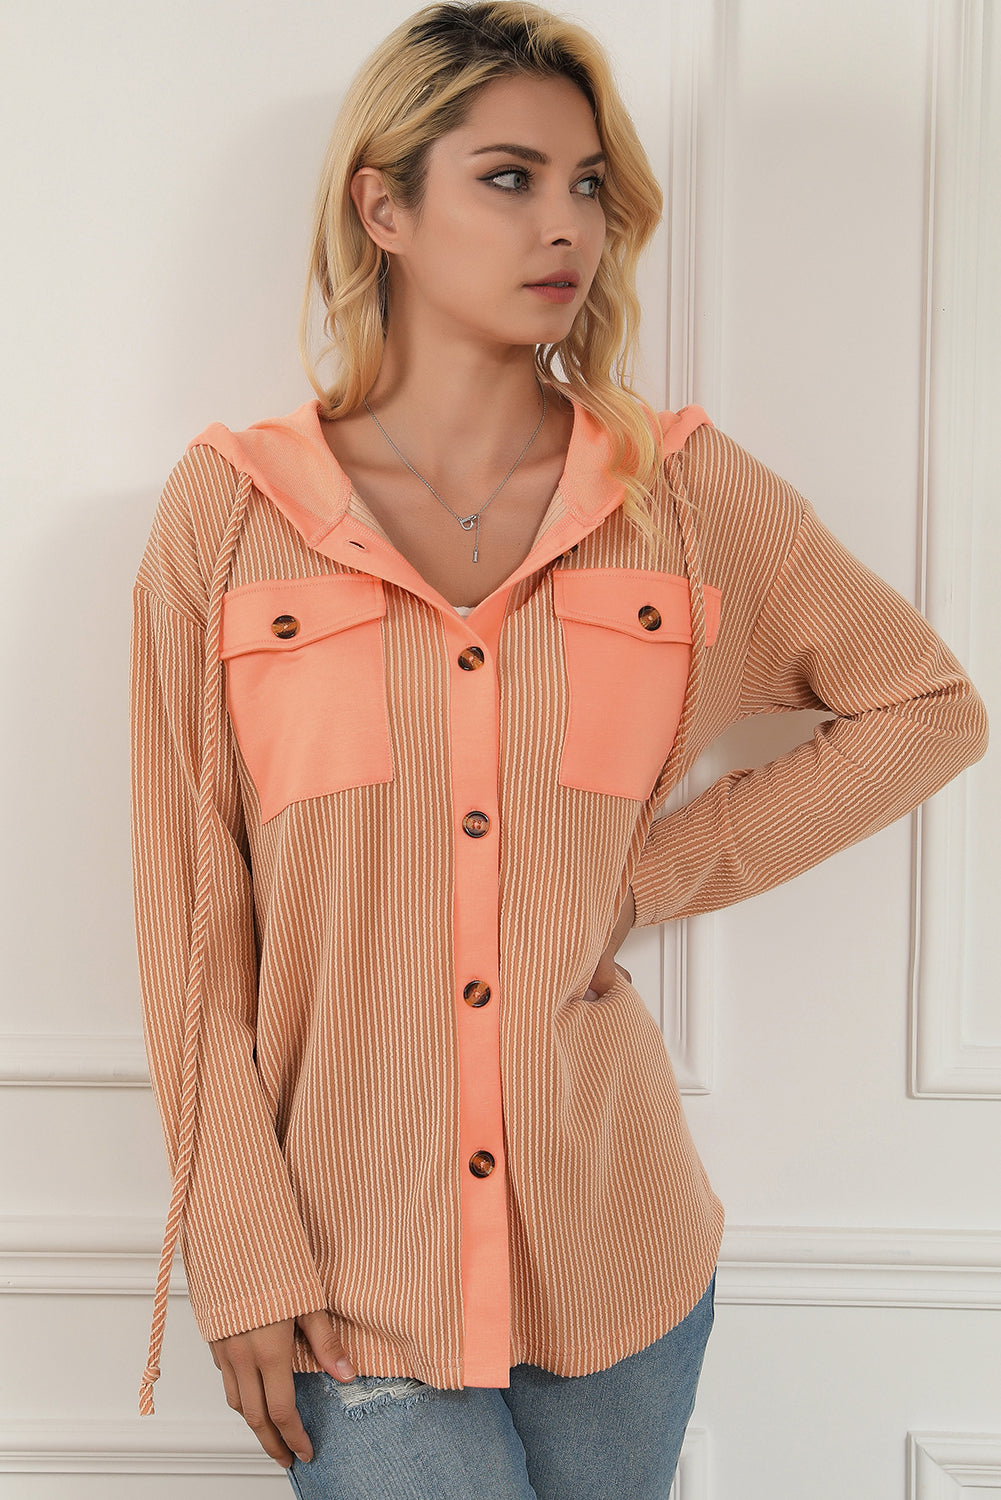 Apricot Flap Pockets Patchwork Hooded Ribbed Shacket